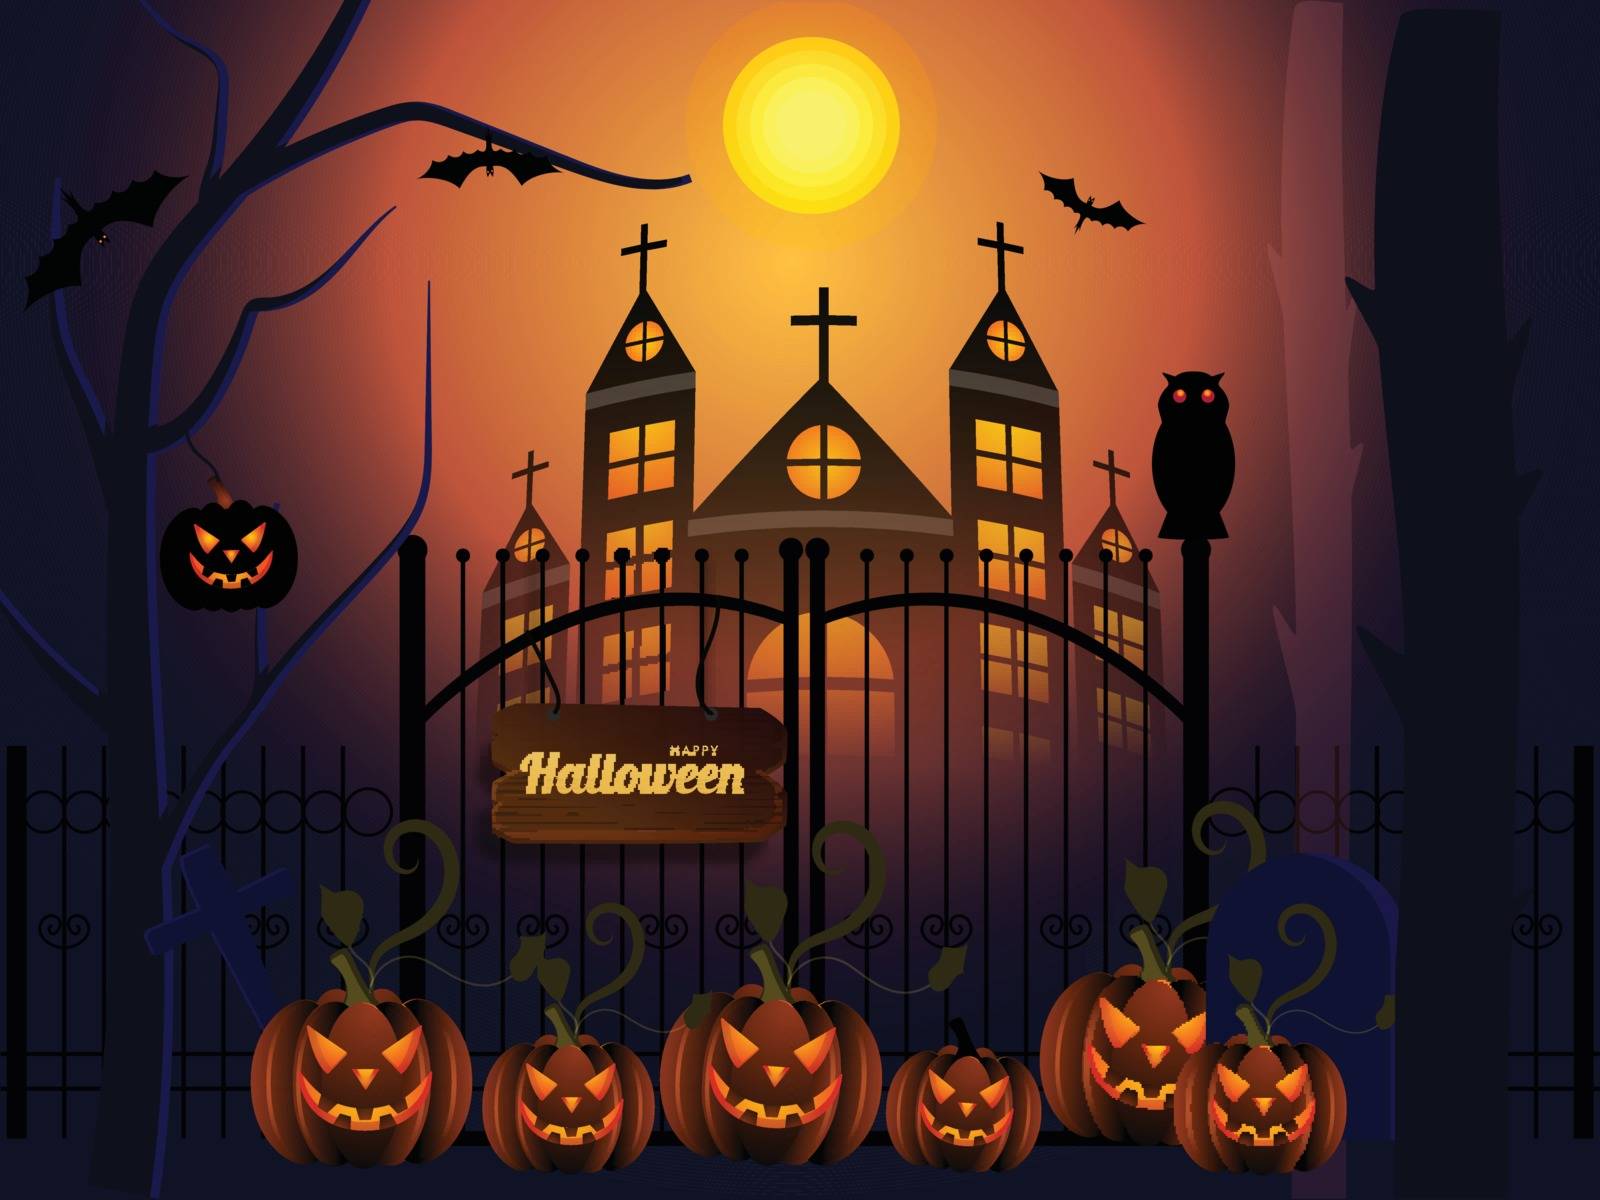 Halloween full moon night background with scary jack-o-lanterns by aispl